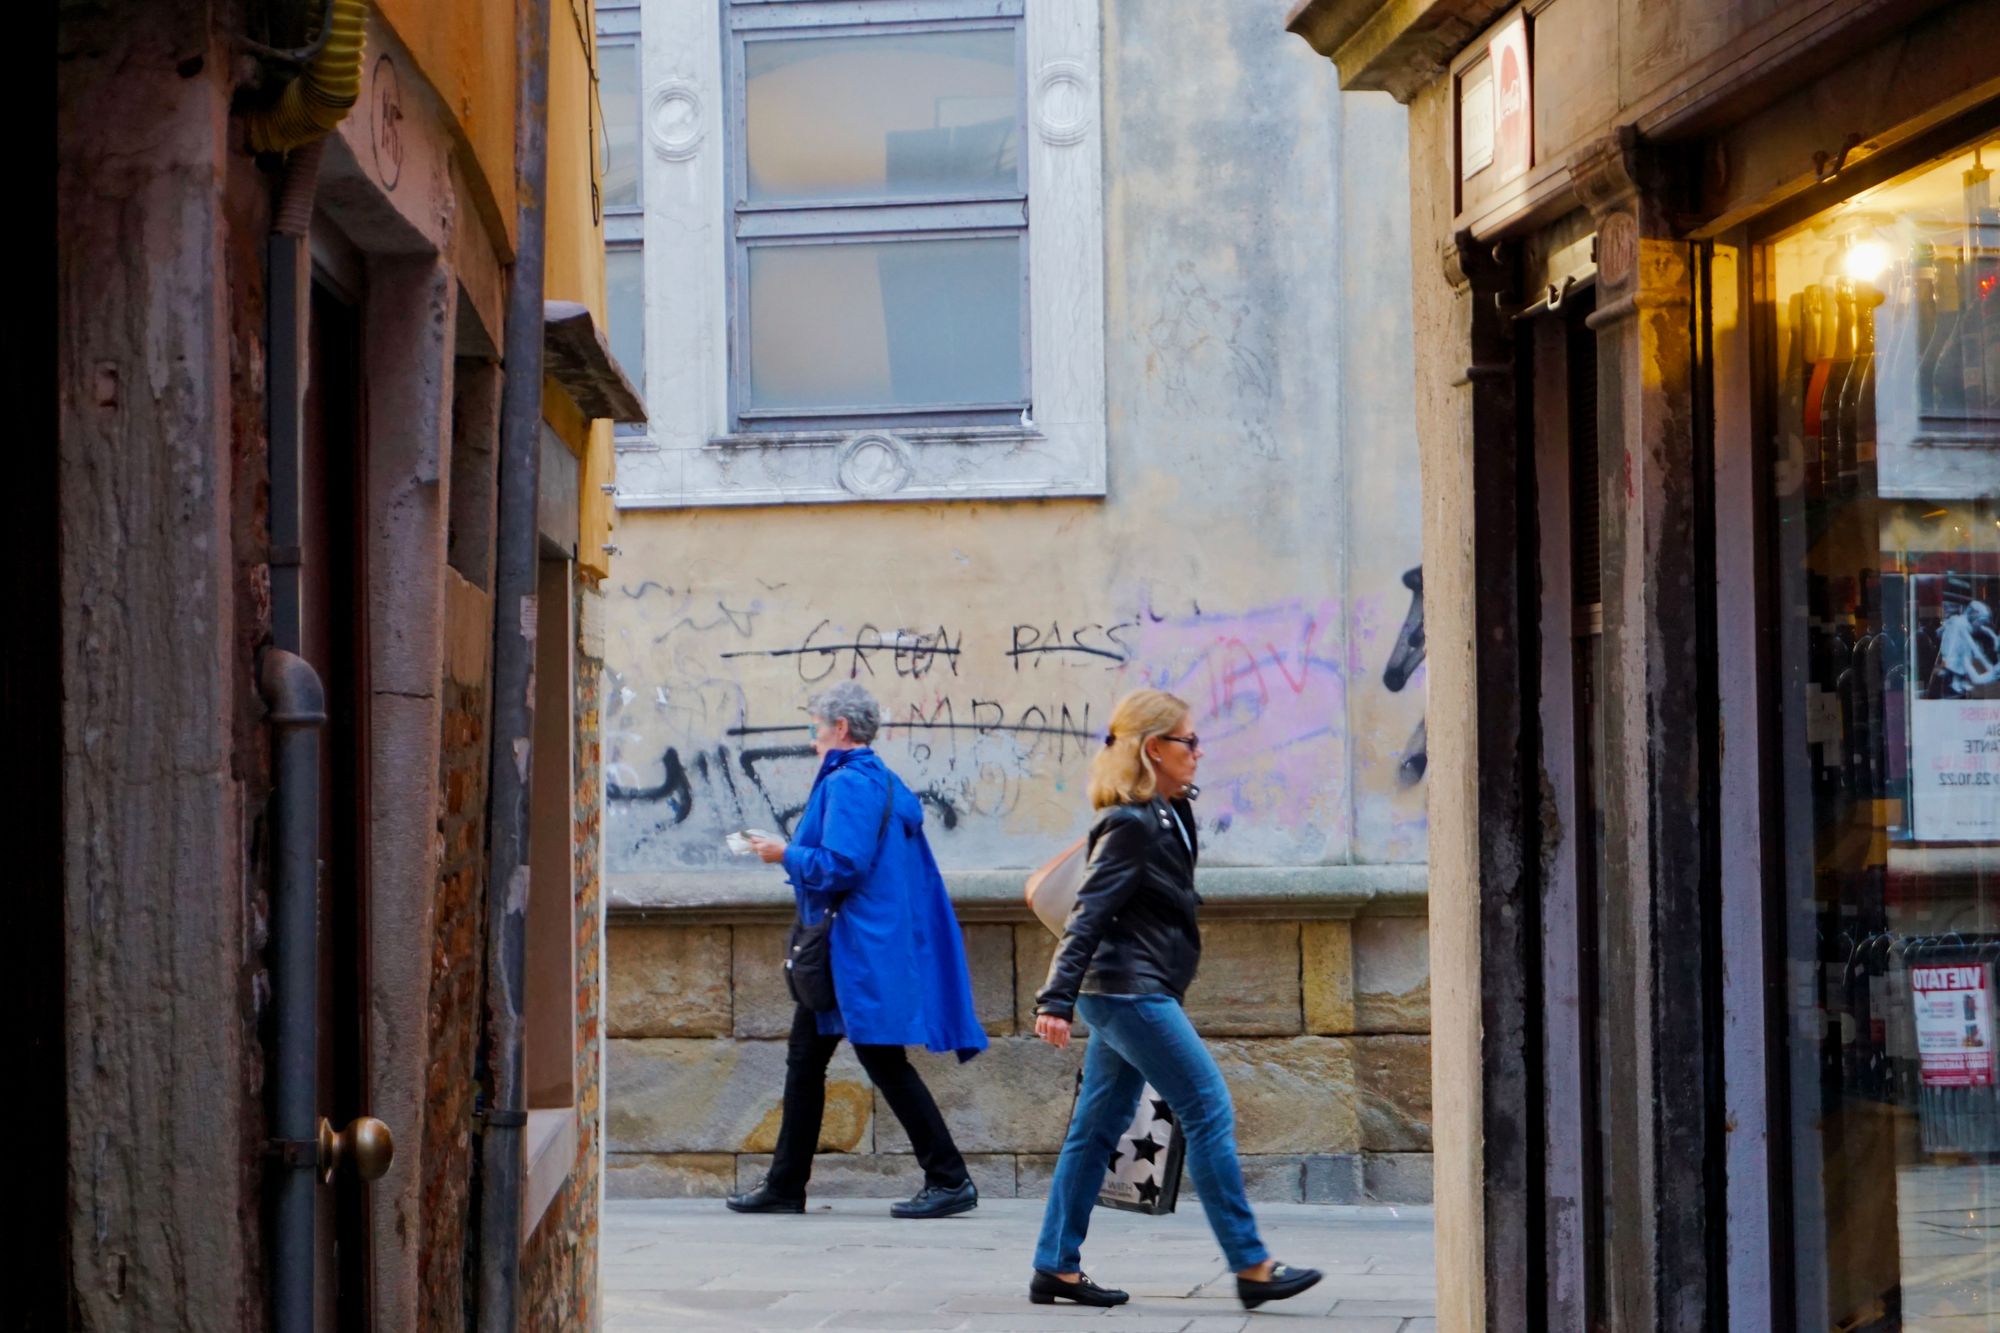 To the end of an alley between two buildings at sunset, against a wall with graffiti (reading "GREEN PASS TAMPON" which has been crossed out): a woman in a leather jacket with shades, and a man in a blue raincoat, walk in opposite directions.